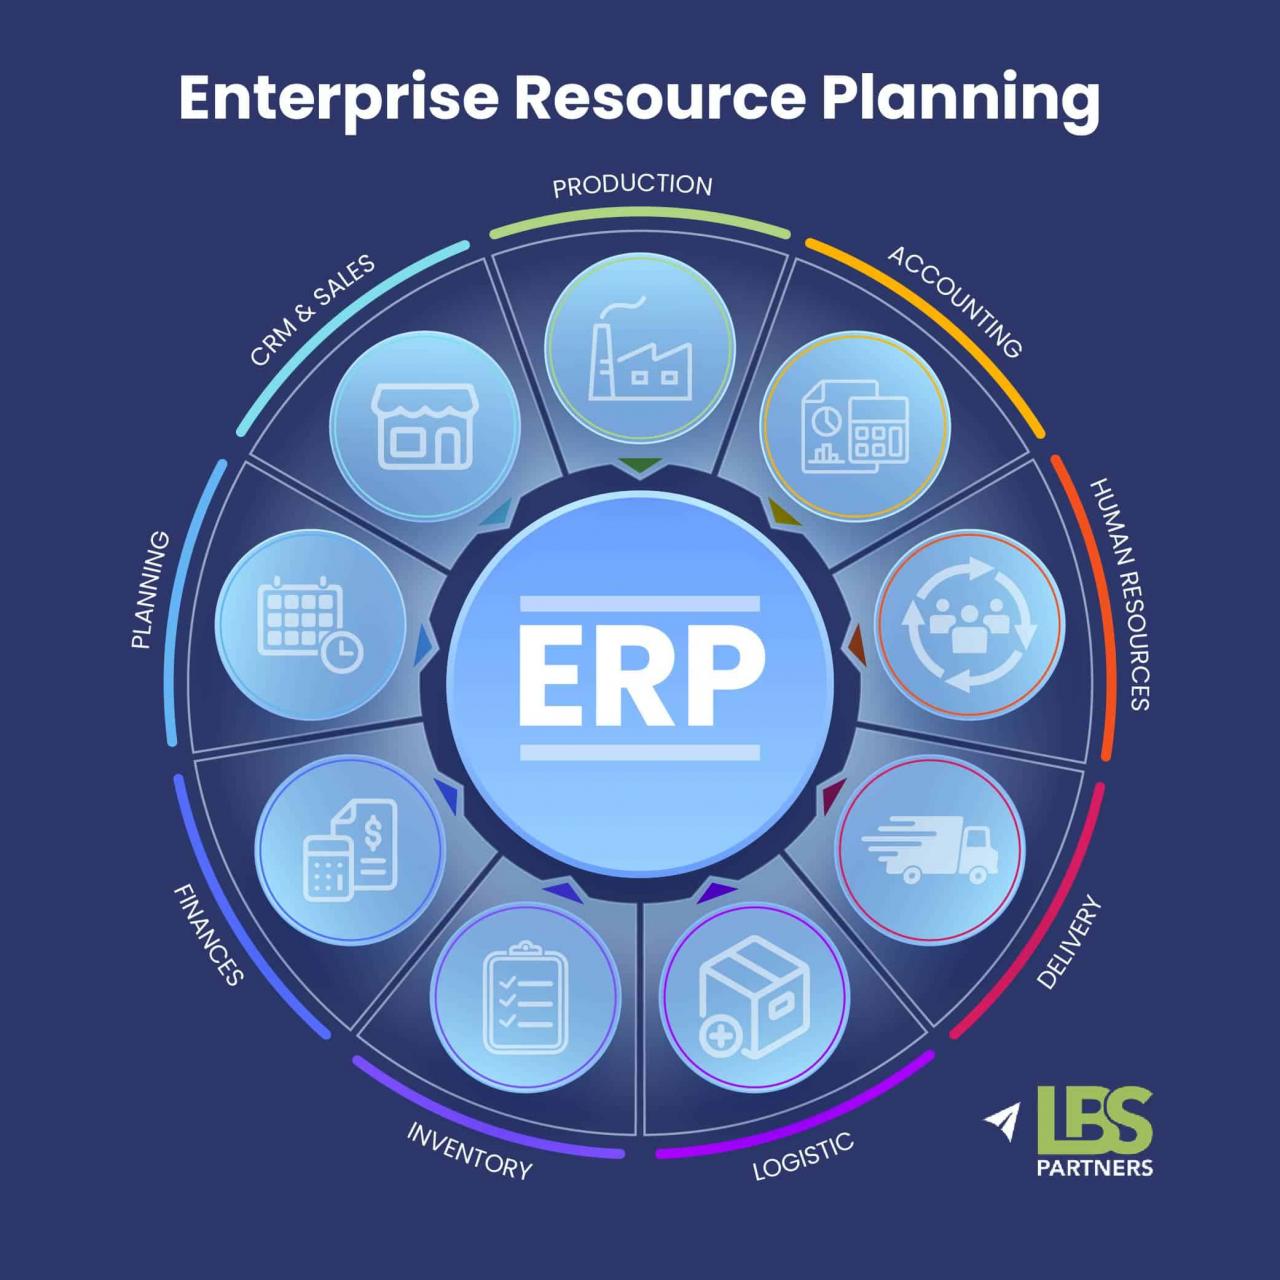 An erp system is an information system based on